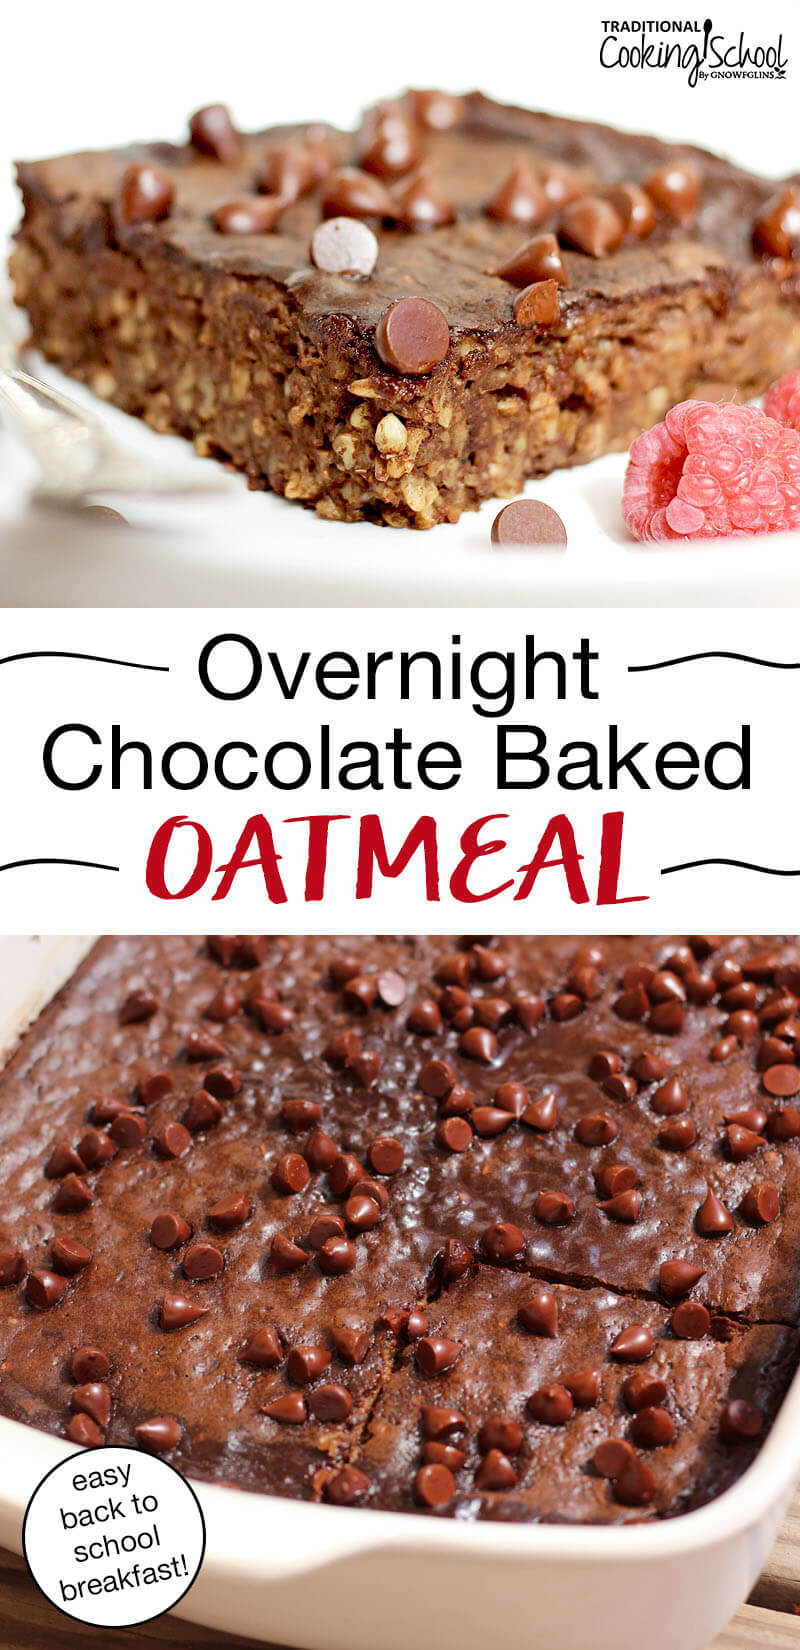 photo collage of baked oatmeal bars on a plate with mini chocolate chips and fresh raspberries scattered over the top, with text overlay: "Overnight Chocolate Baked Oatmeal (easy back to school breakfast!)"